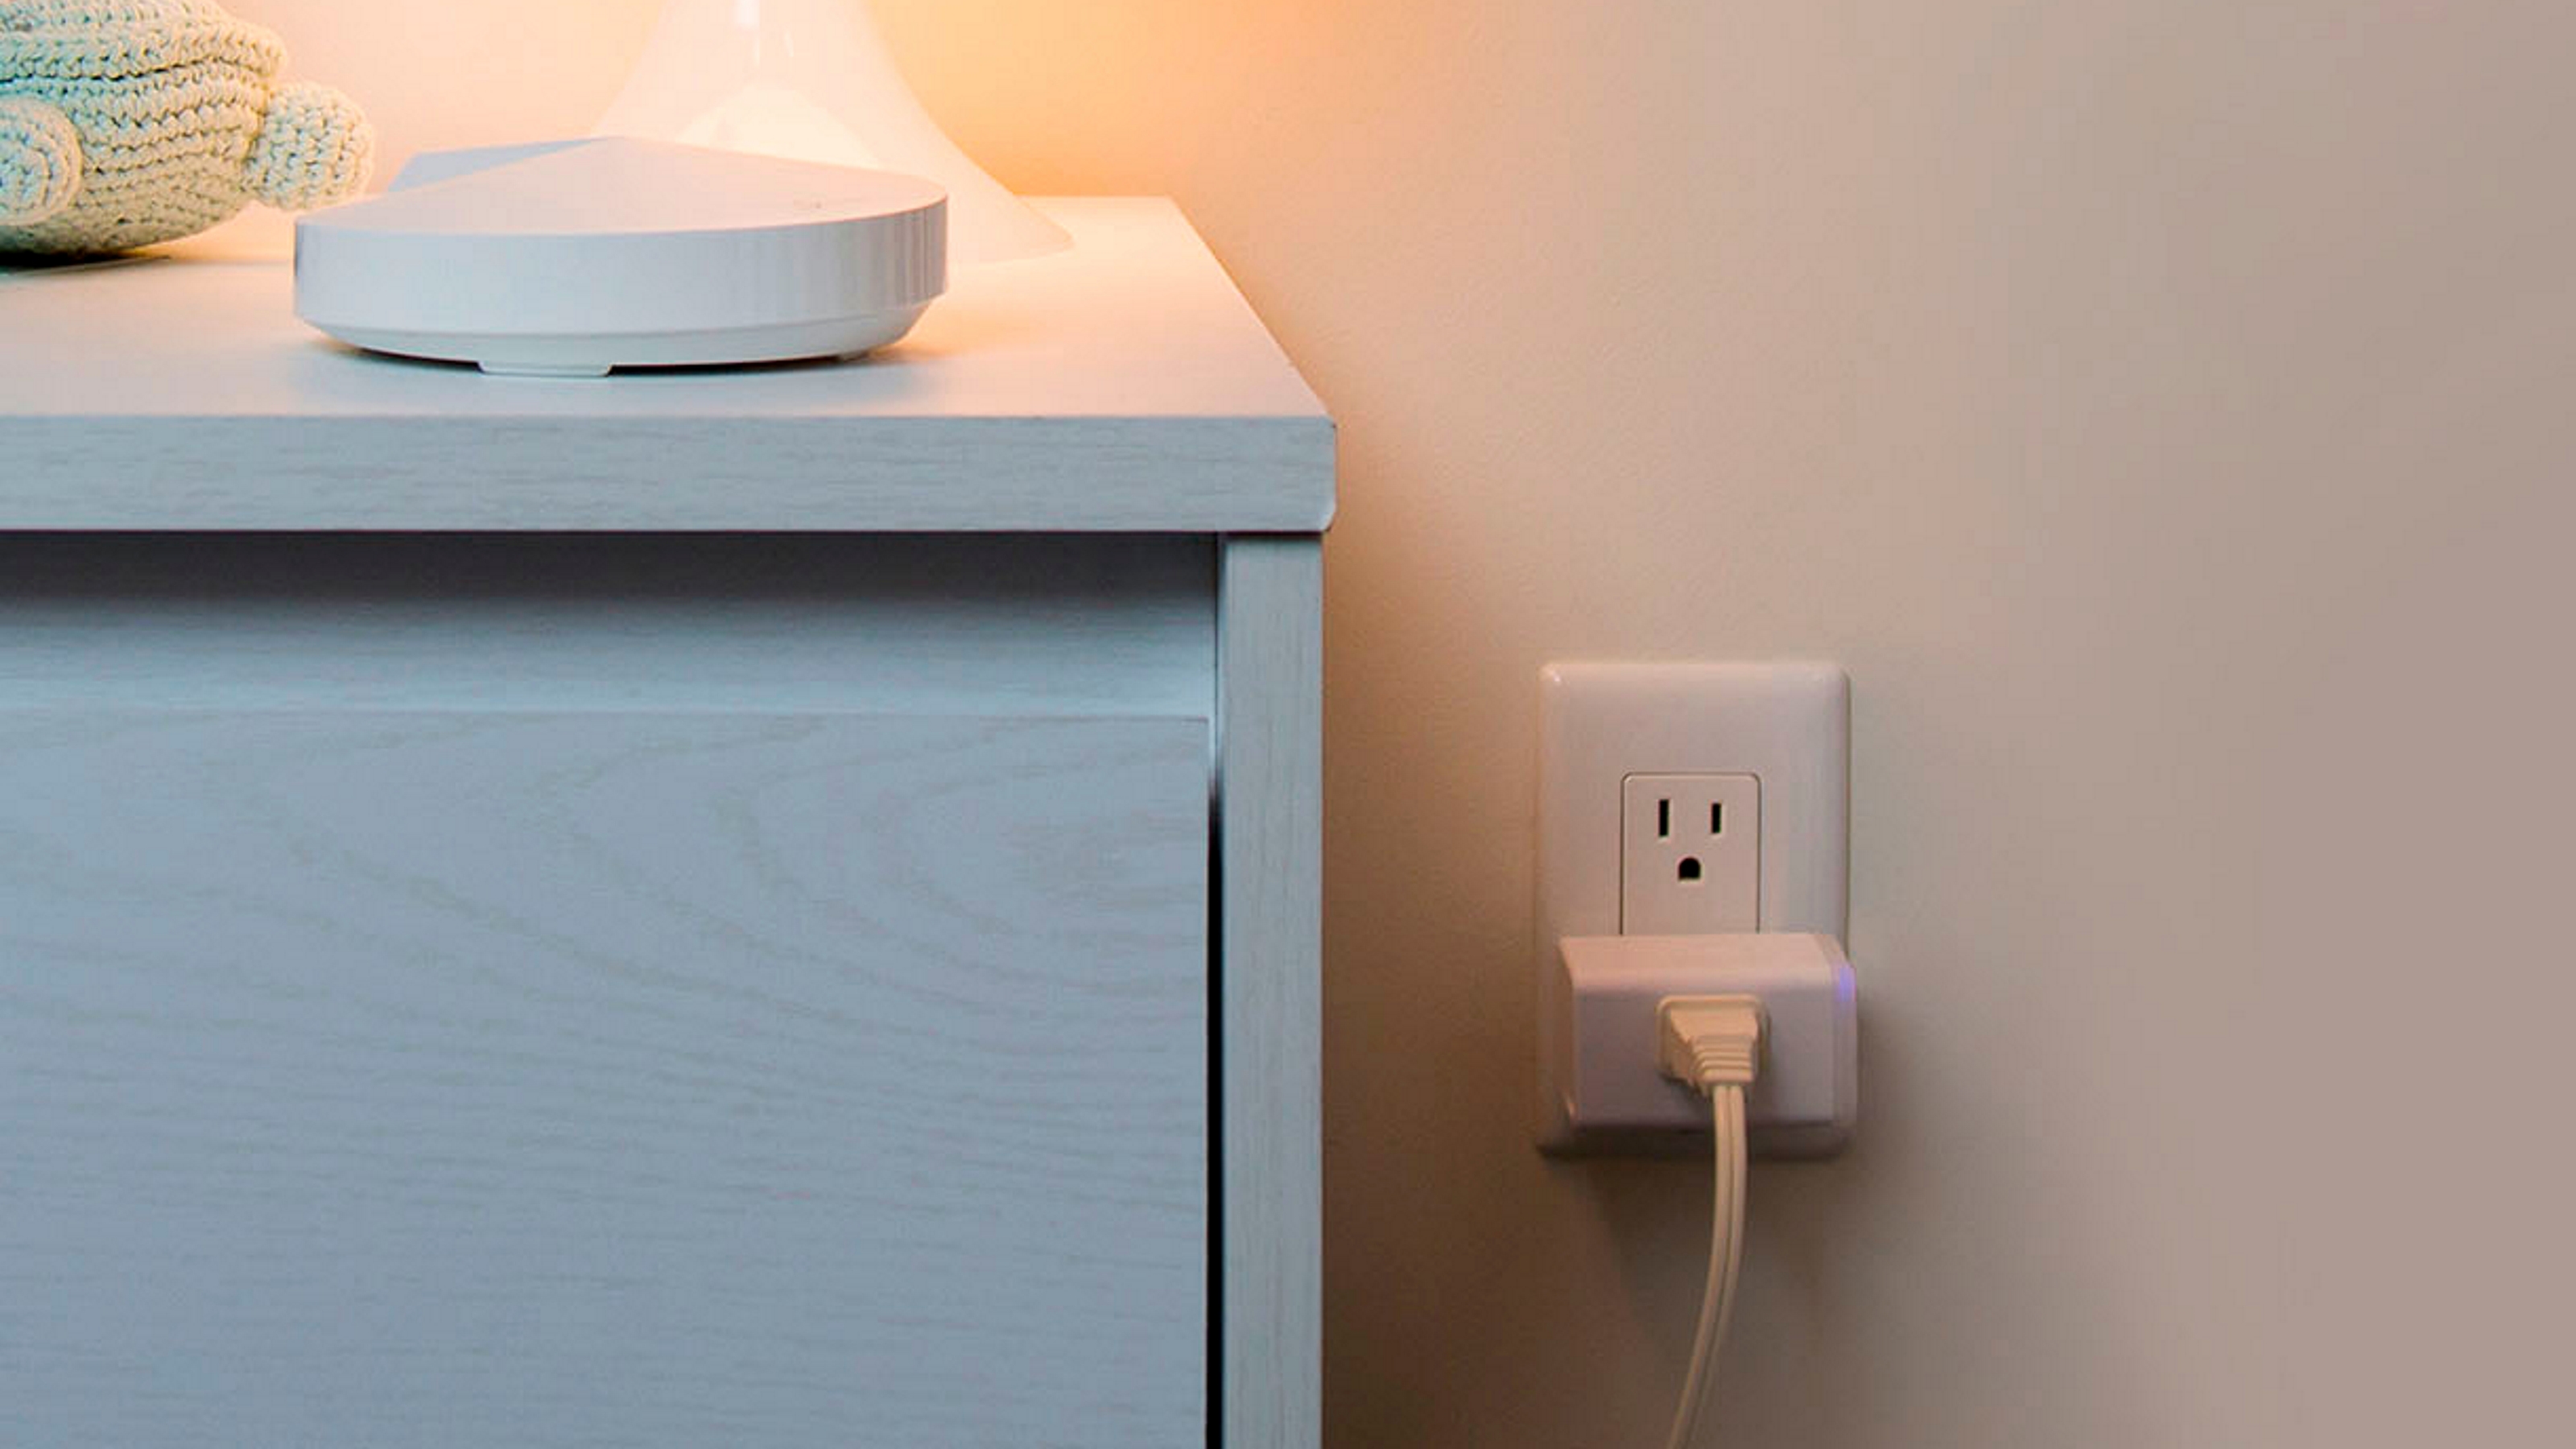 Cut Down Your Electric Bills with Tapo Smart Plugs